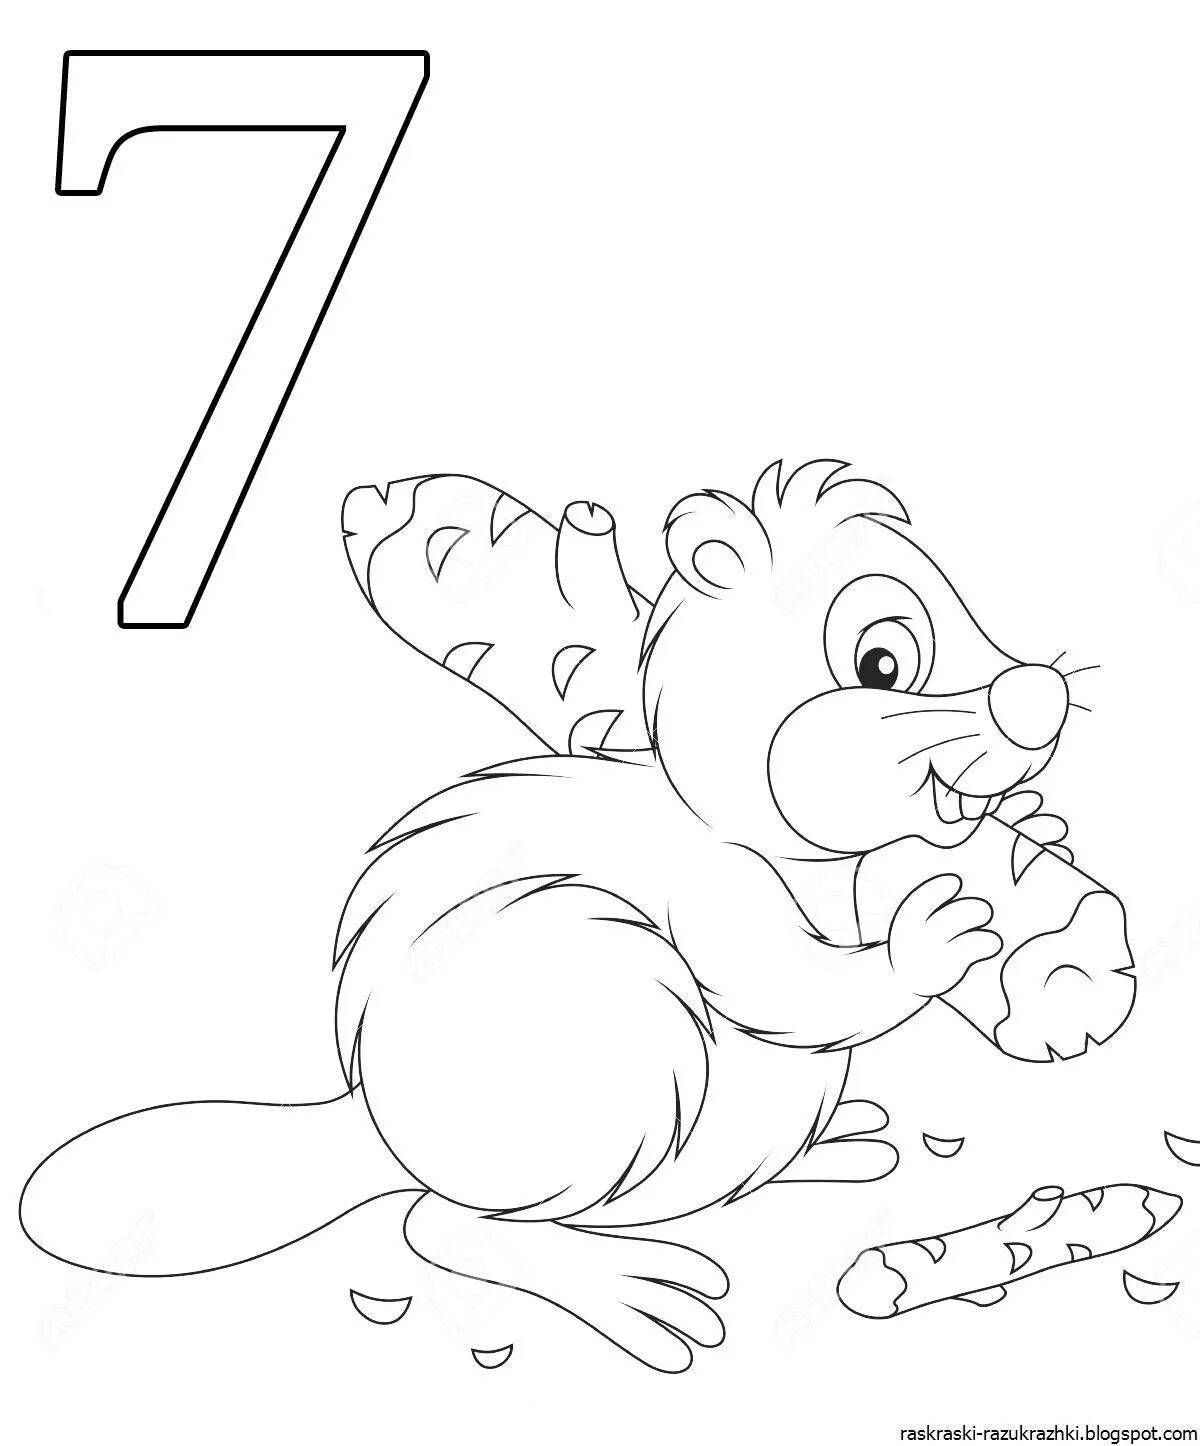 A fun letter and number coloring page for kids